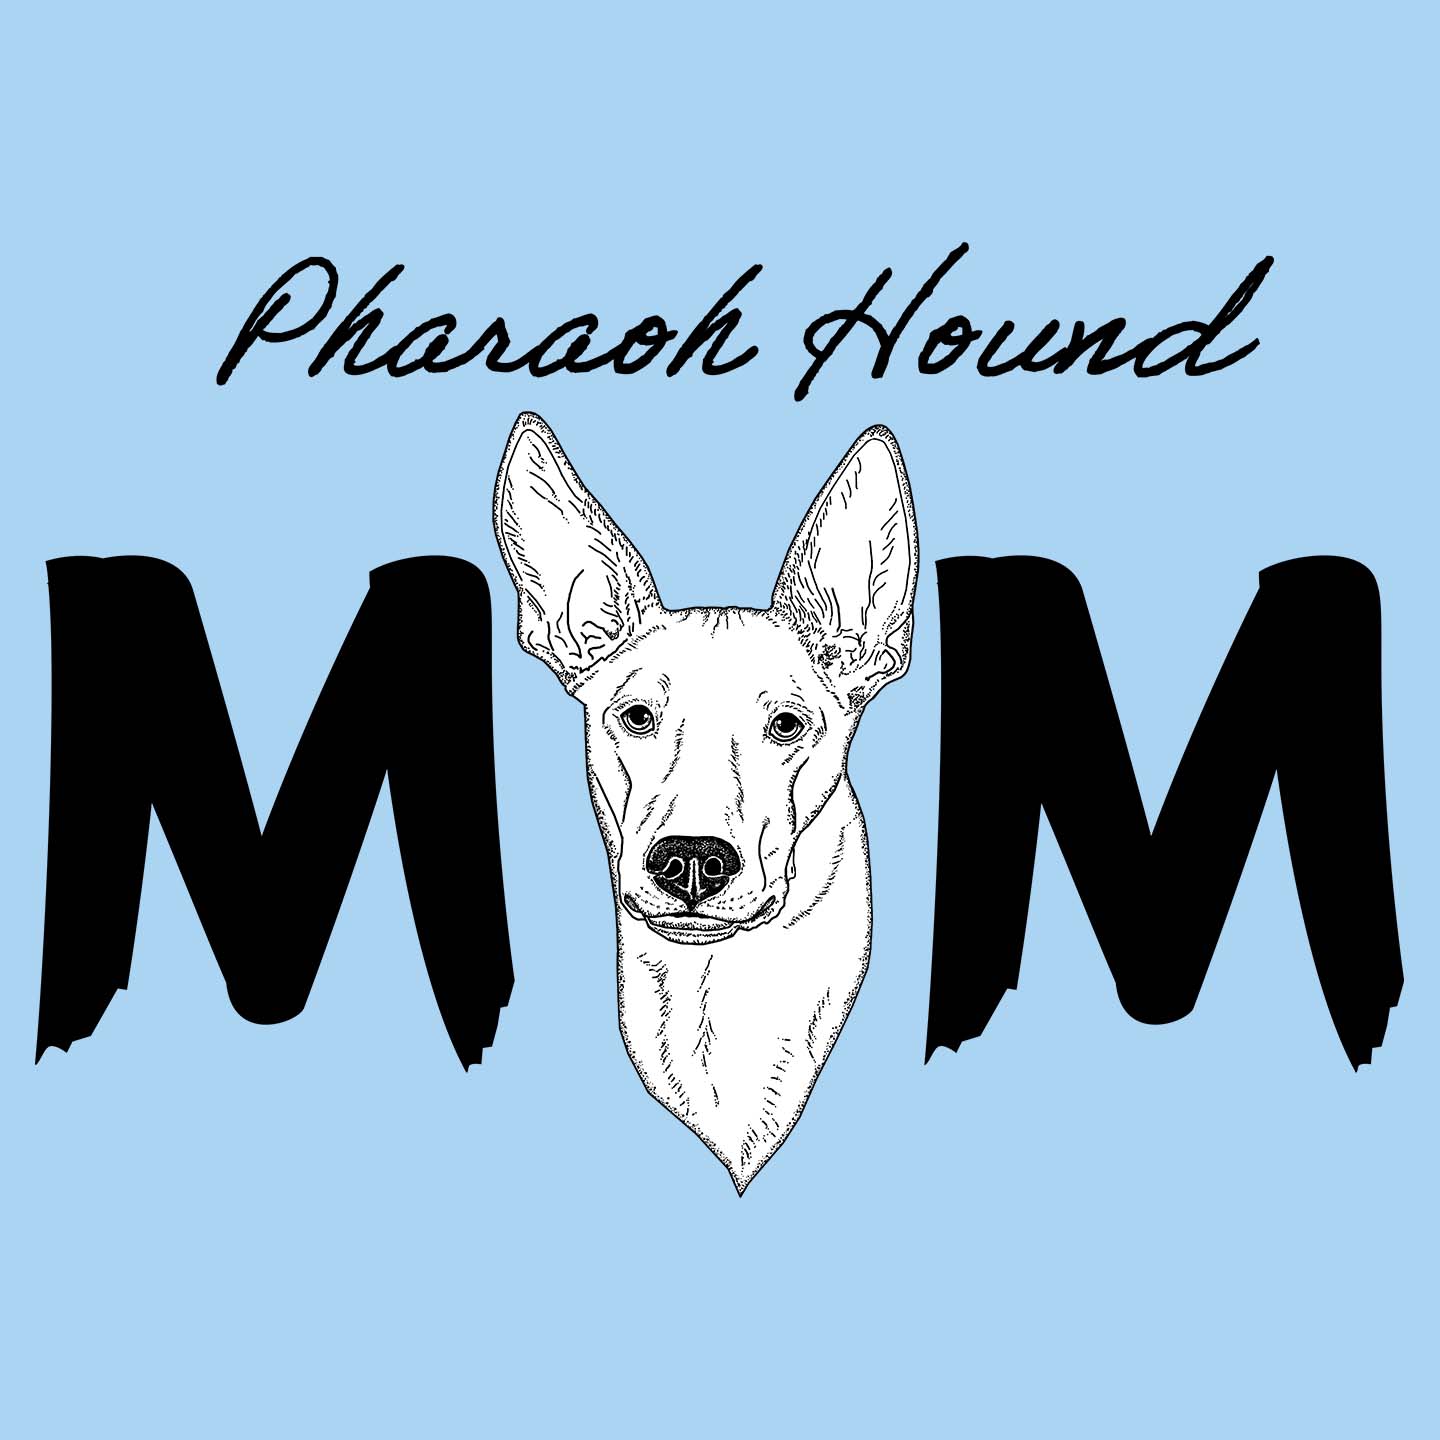 Pharaoh Hound Breed Mom - Women's Fitted T-Shirt